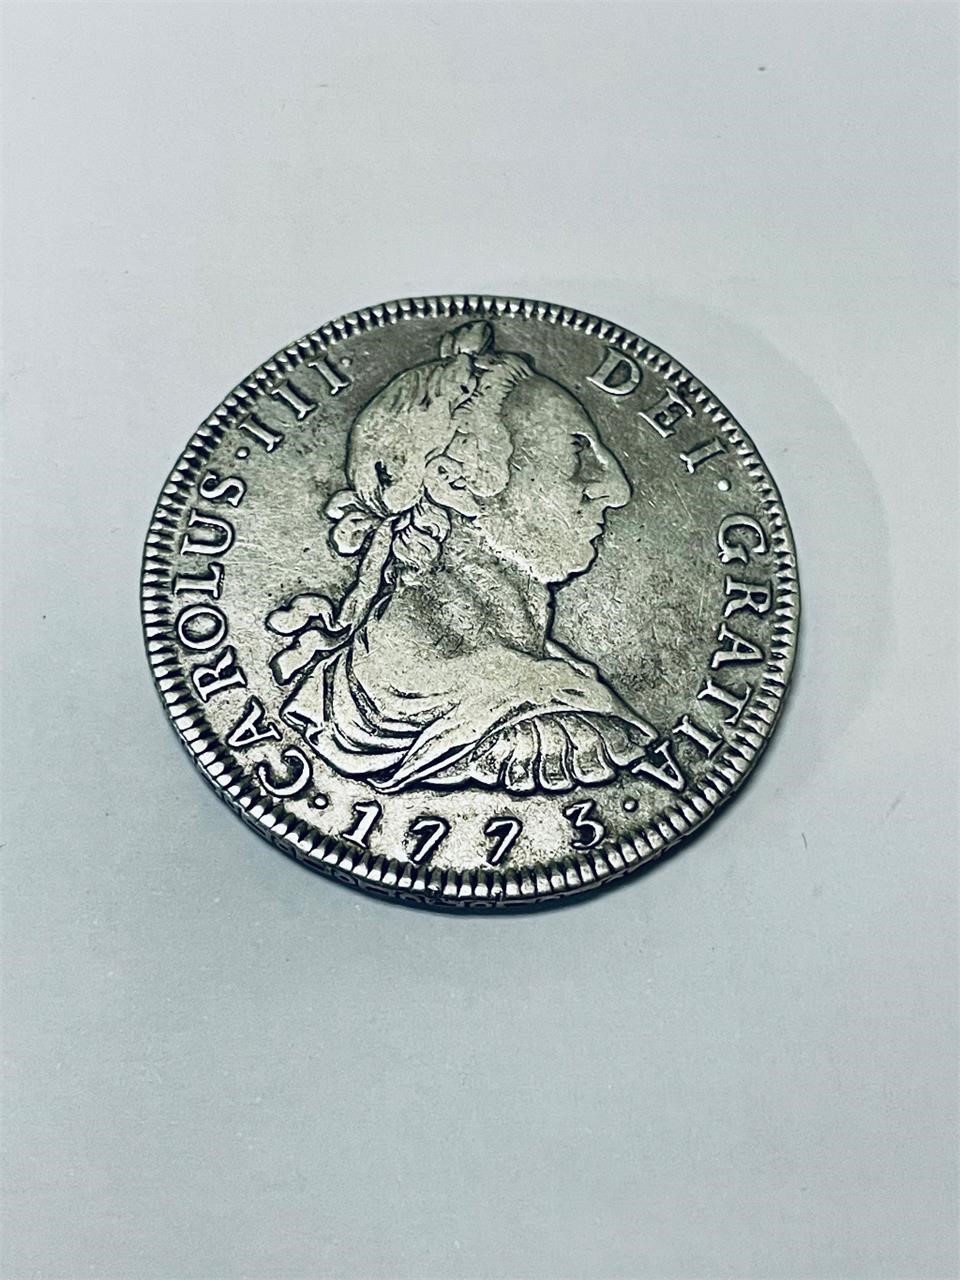 High End Coins, Jewelry, and Collectibles